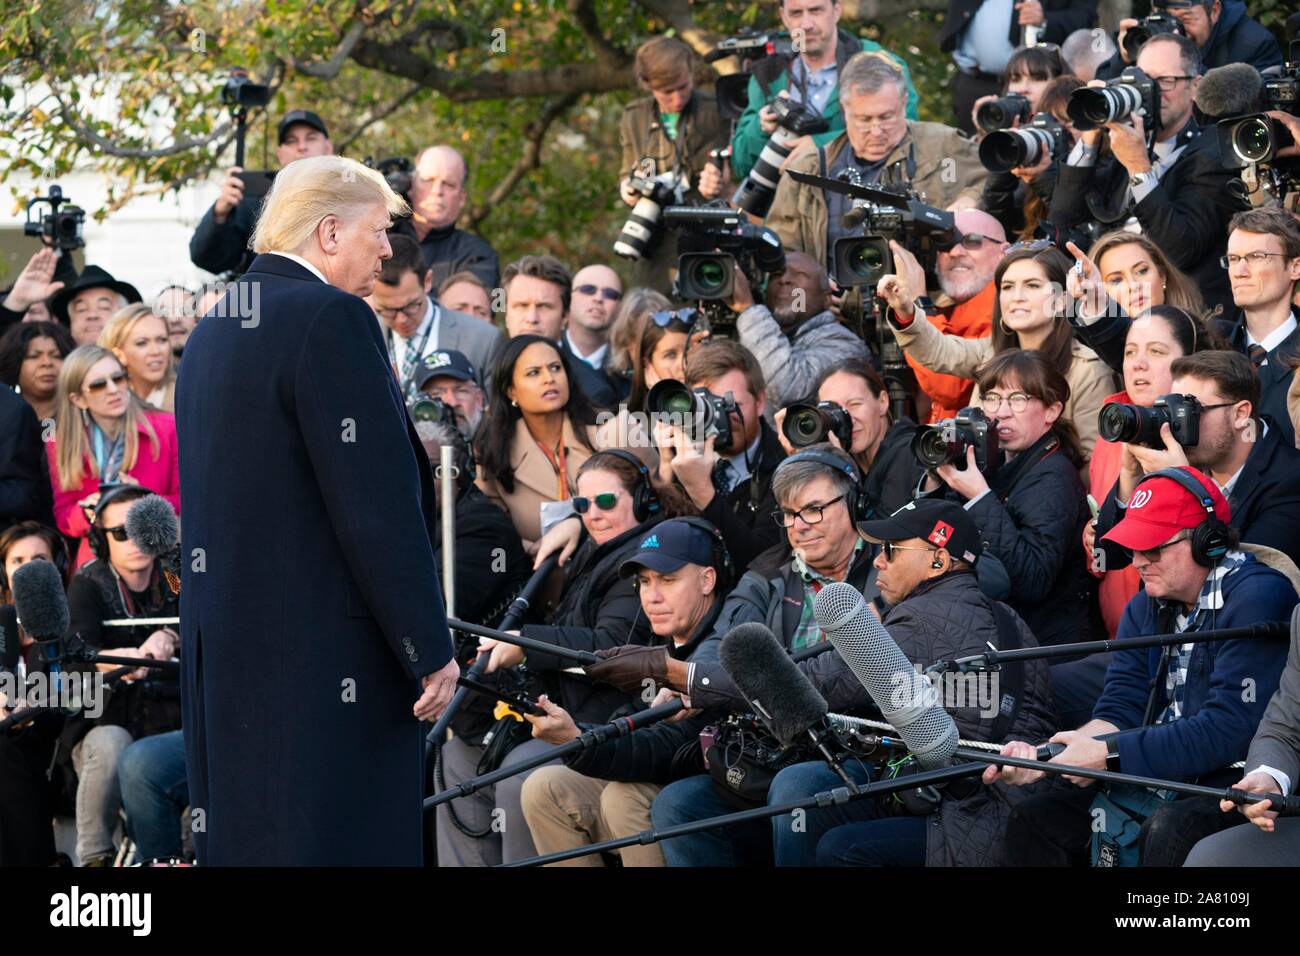 Washington, United States of America. 04 November, 2019. U.S. President Donald Trump stops to speak with the media prior to boarding Marine One to begin his trip to Kentucky on the South Lawn of the White House November 4, 2019 in Washington, DC.  Credit: Joyce Boghosian/White House Photo/Alamy Live News Stock Photo